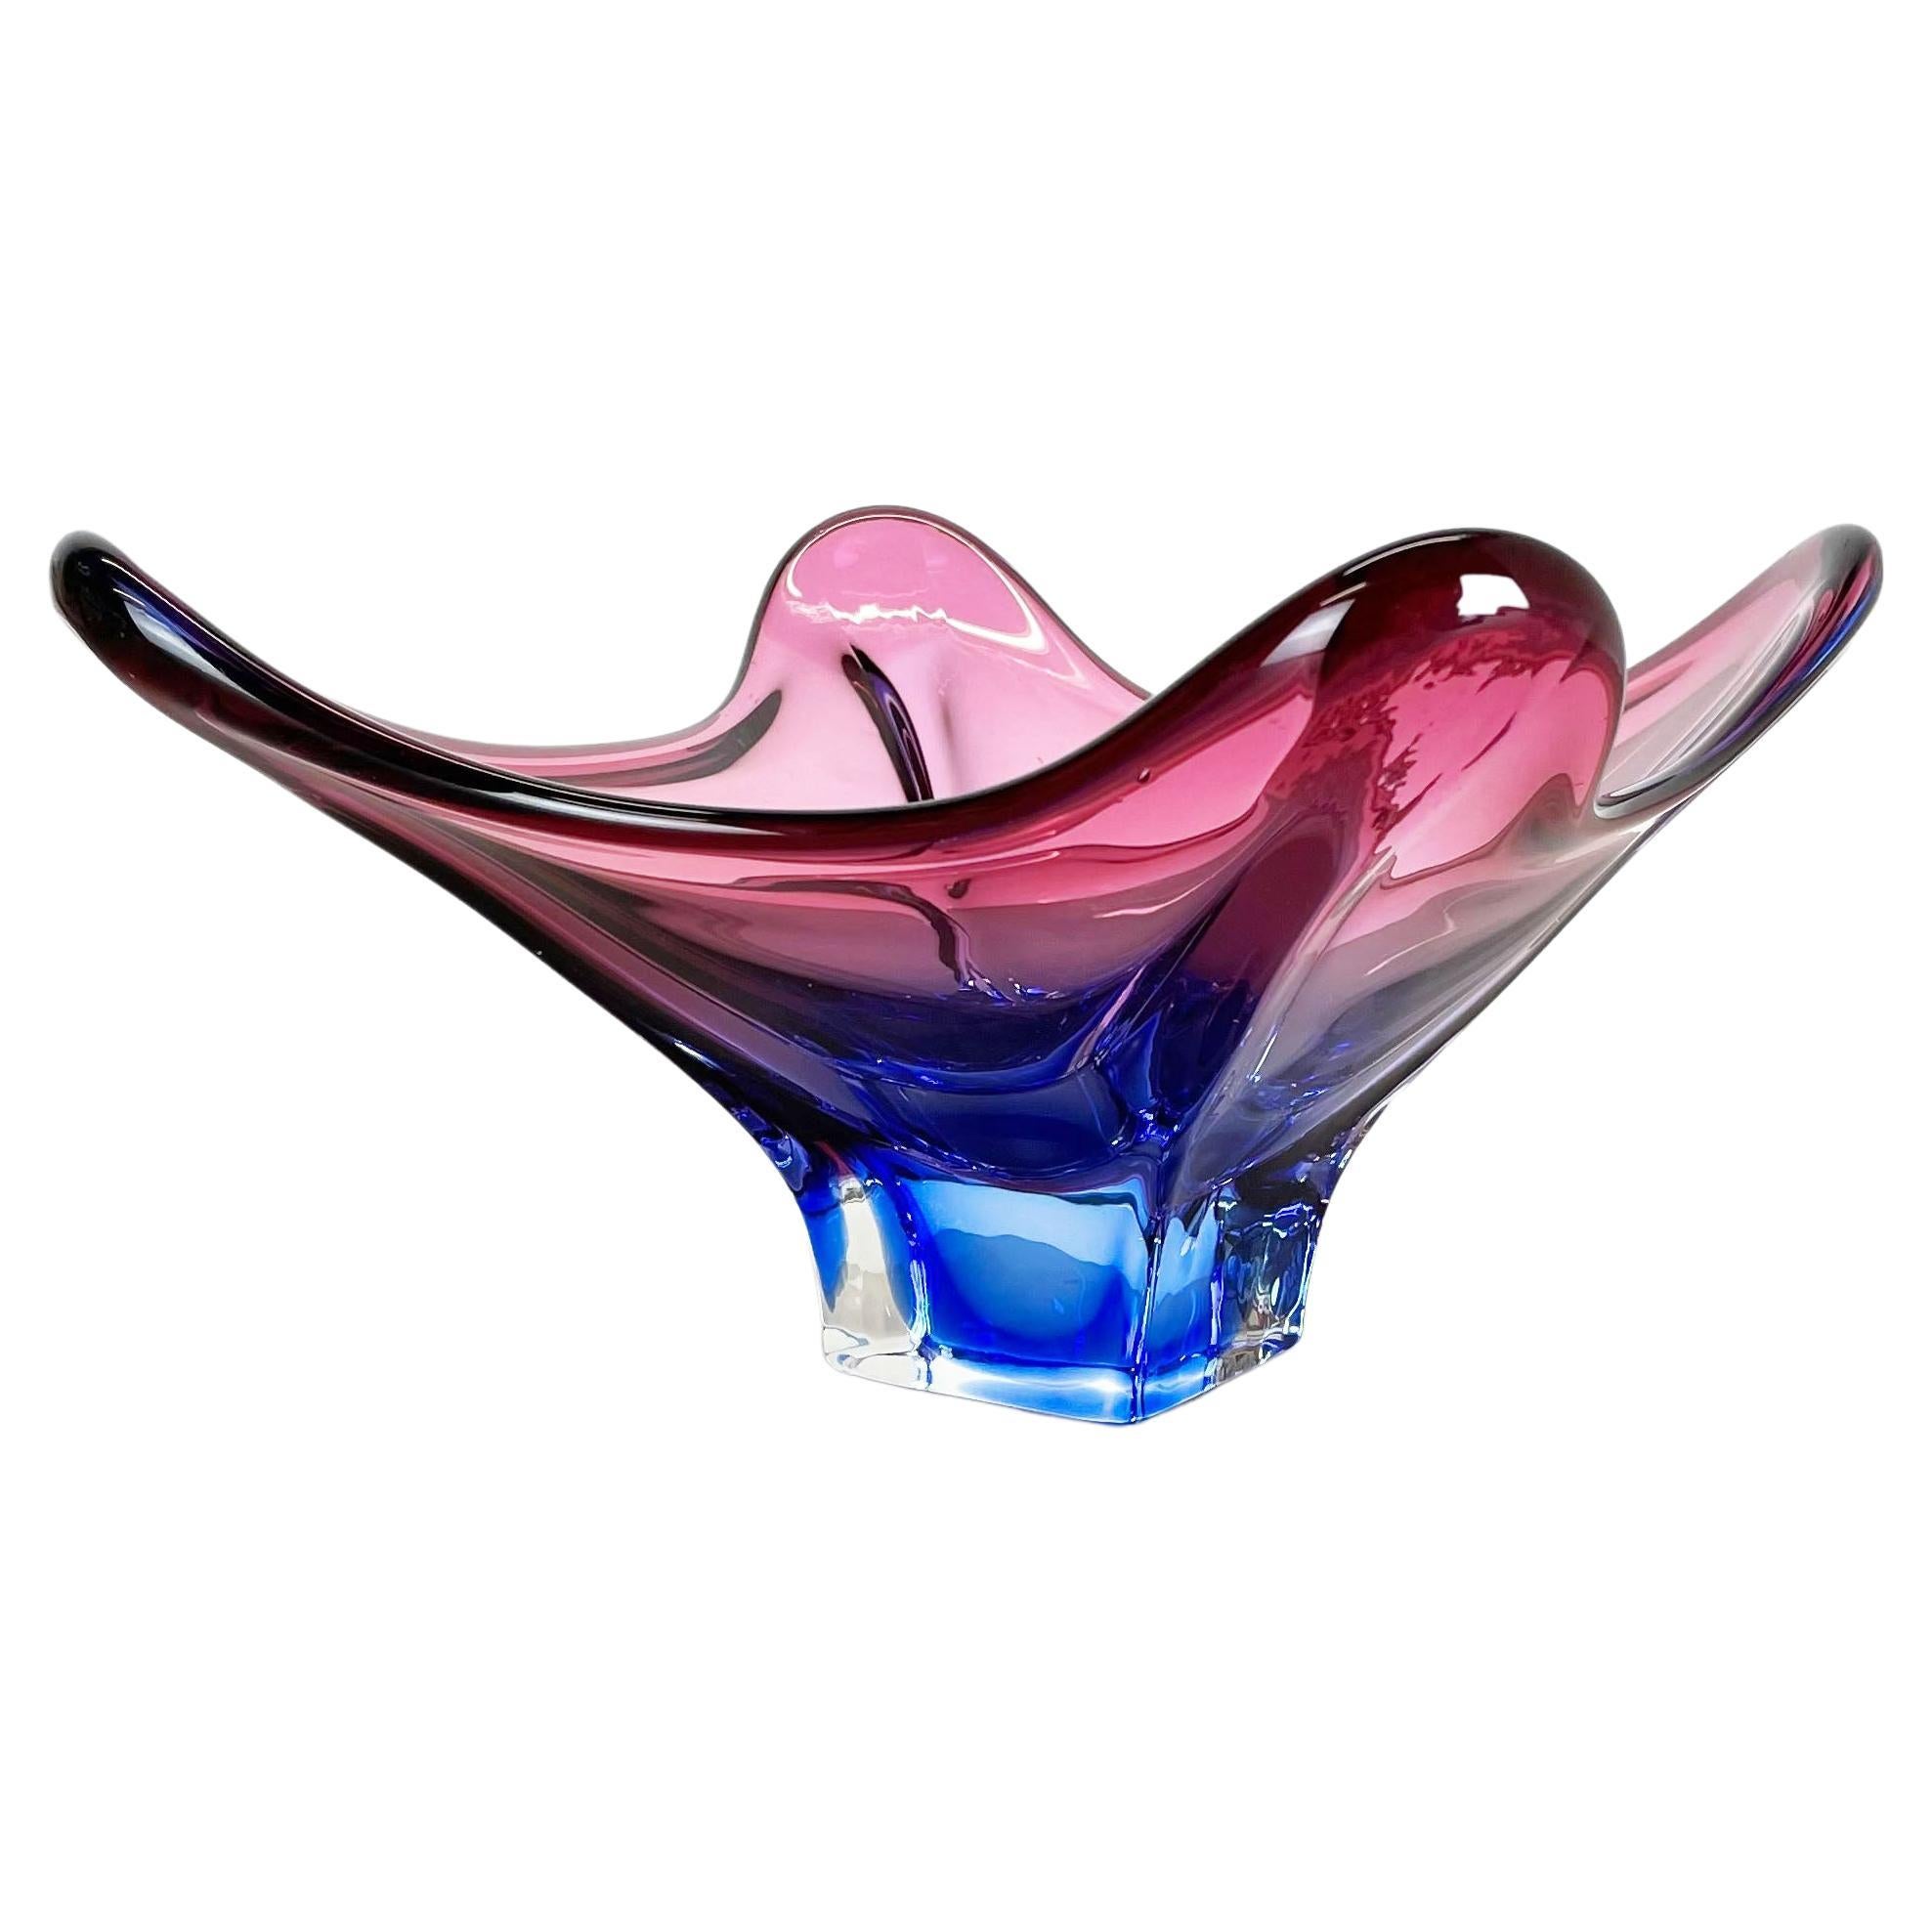 2 Kg Floral Glass Bowl Shell Centerpiece by Fratelli Toso Murano, Italy, 1970s